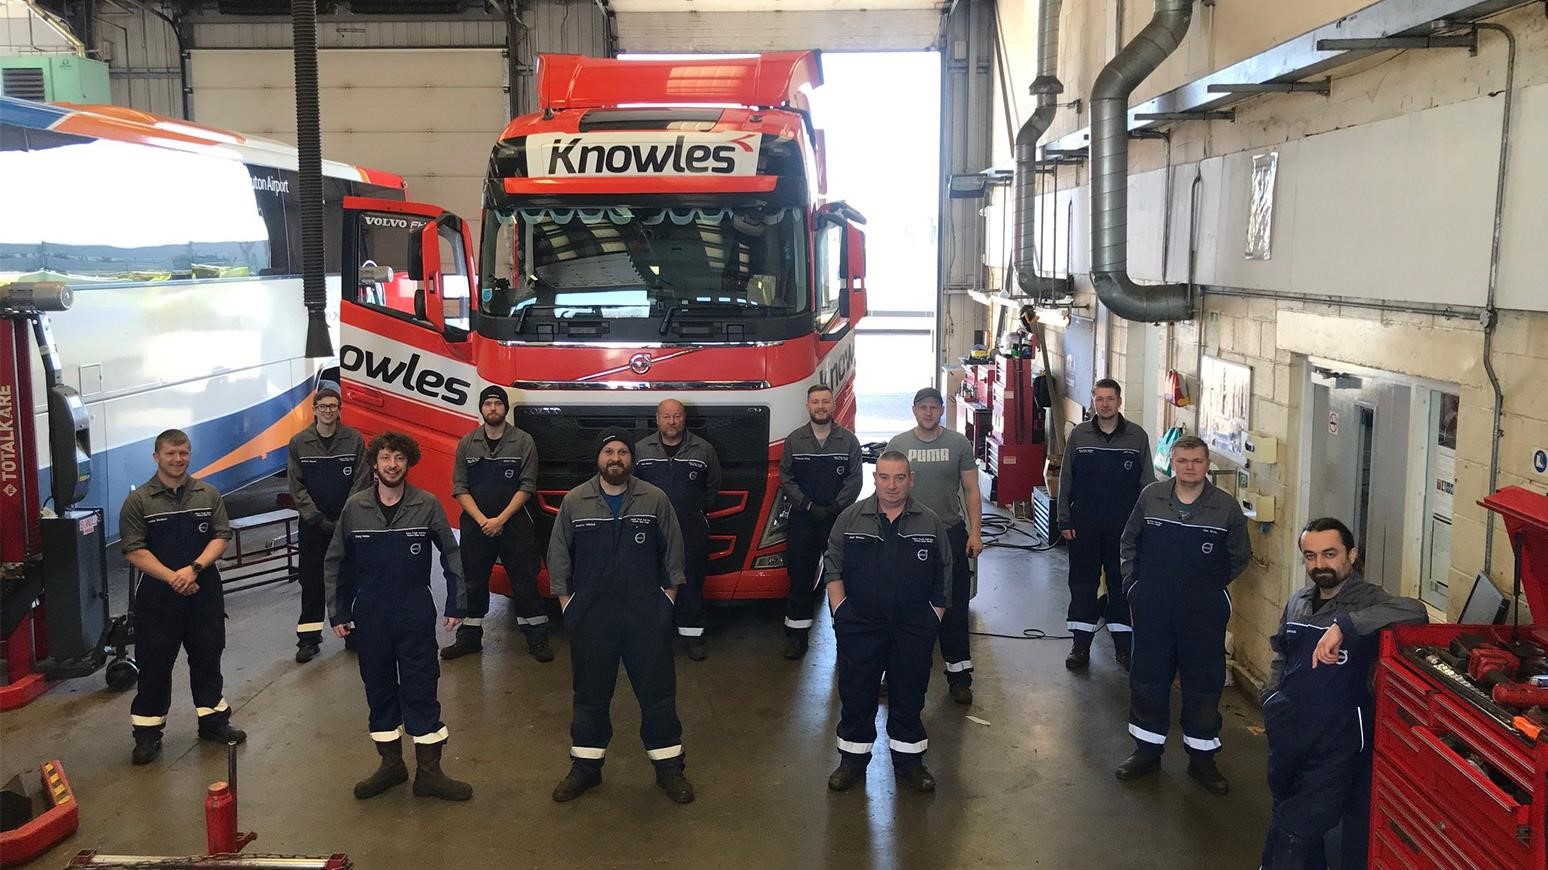 Volvo Technicians Volunteer For Weekend Shifts To Serve Customer Knowles Transport, Dealer Lends Them A Volvo FH Demonstrator